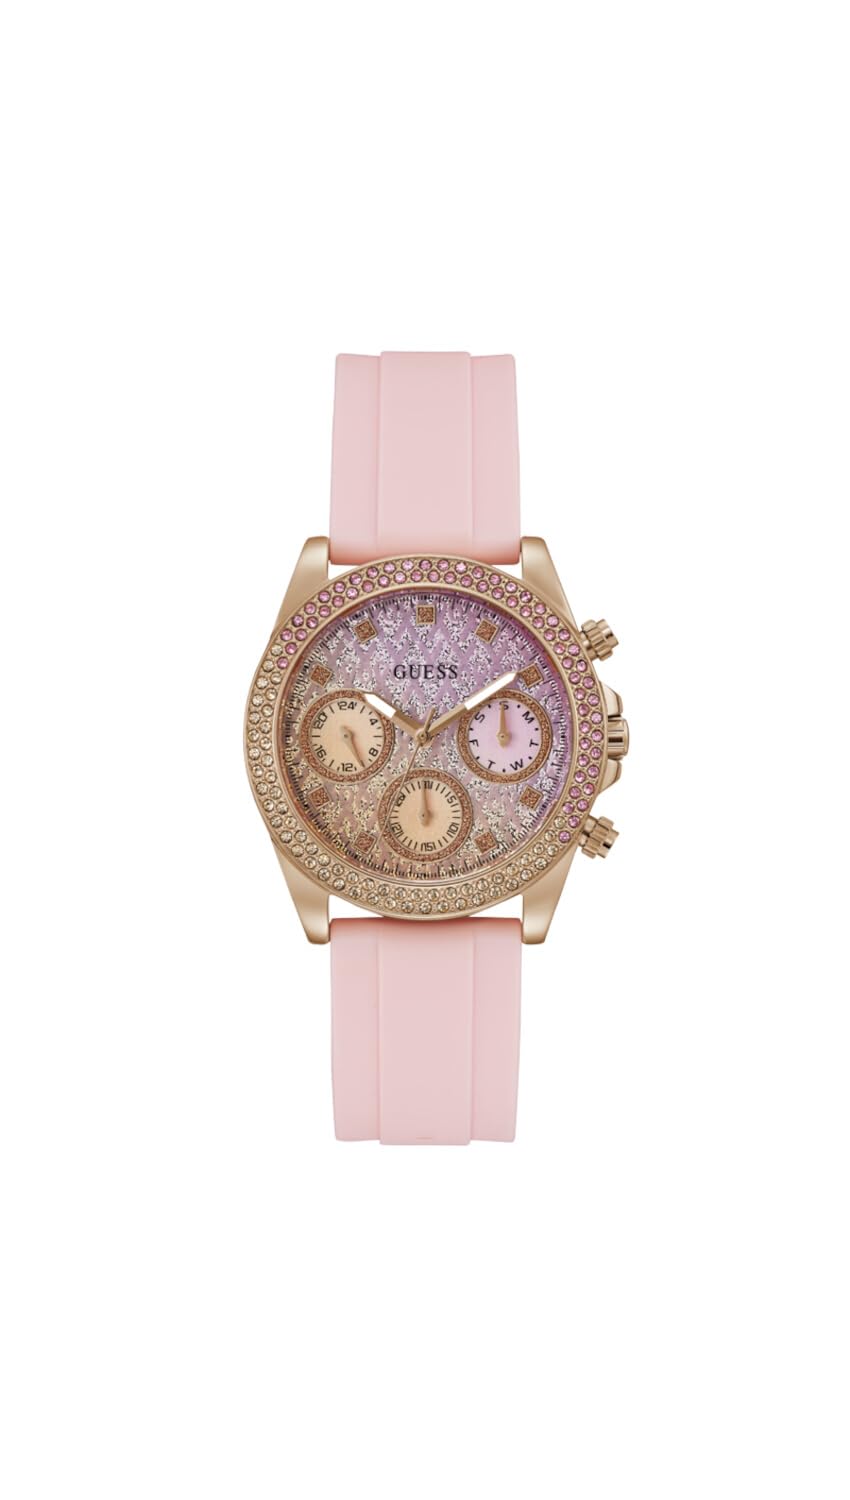 GUESS Women's 38mm Watch - Pink Strap Pink Dial Rose Gold Tone Case